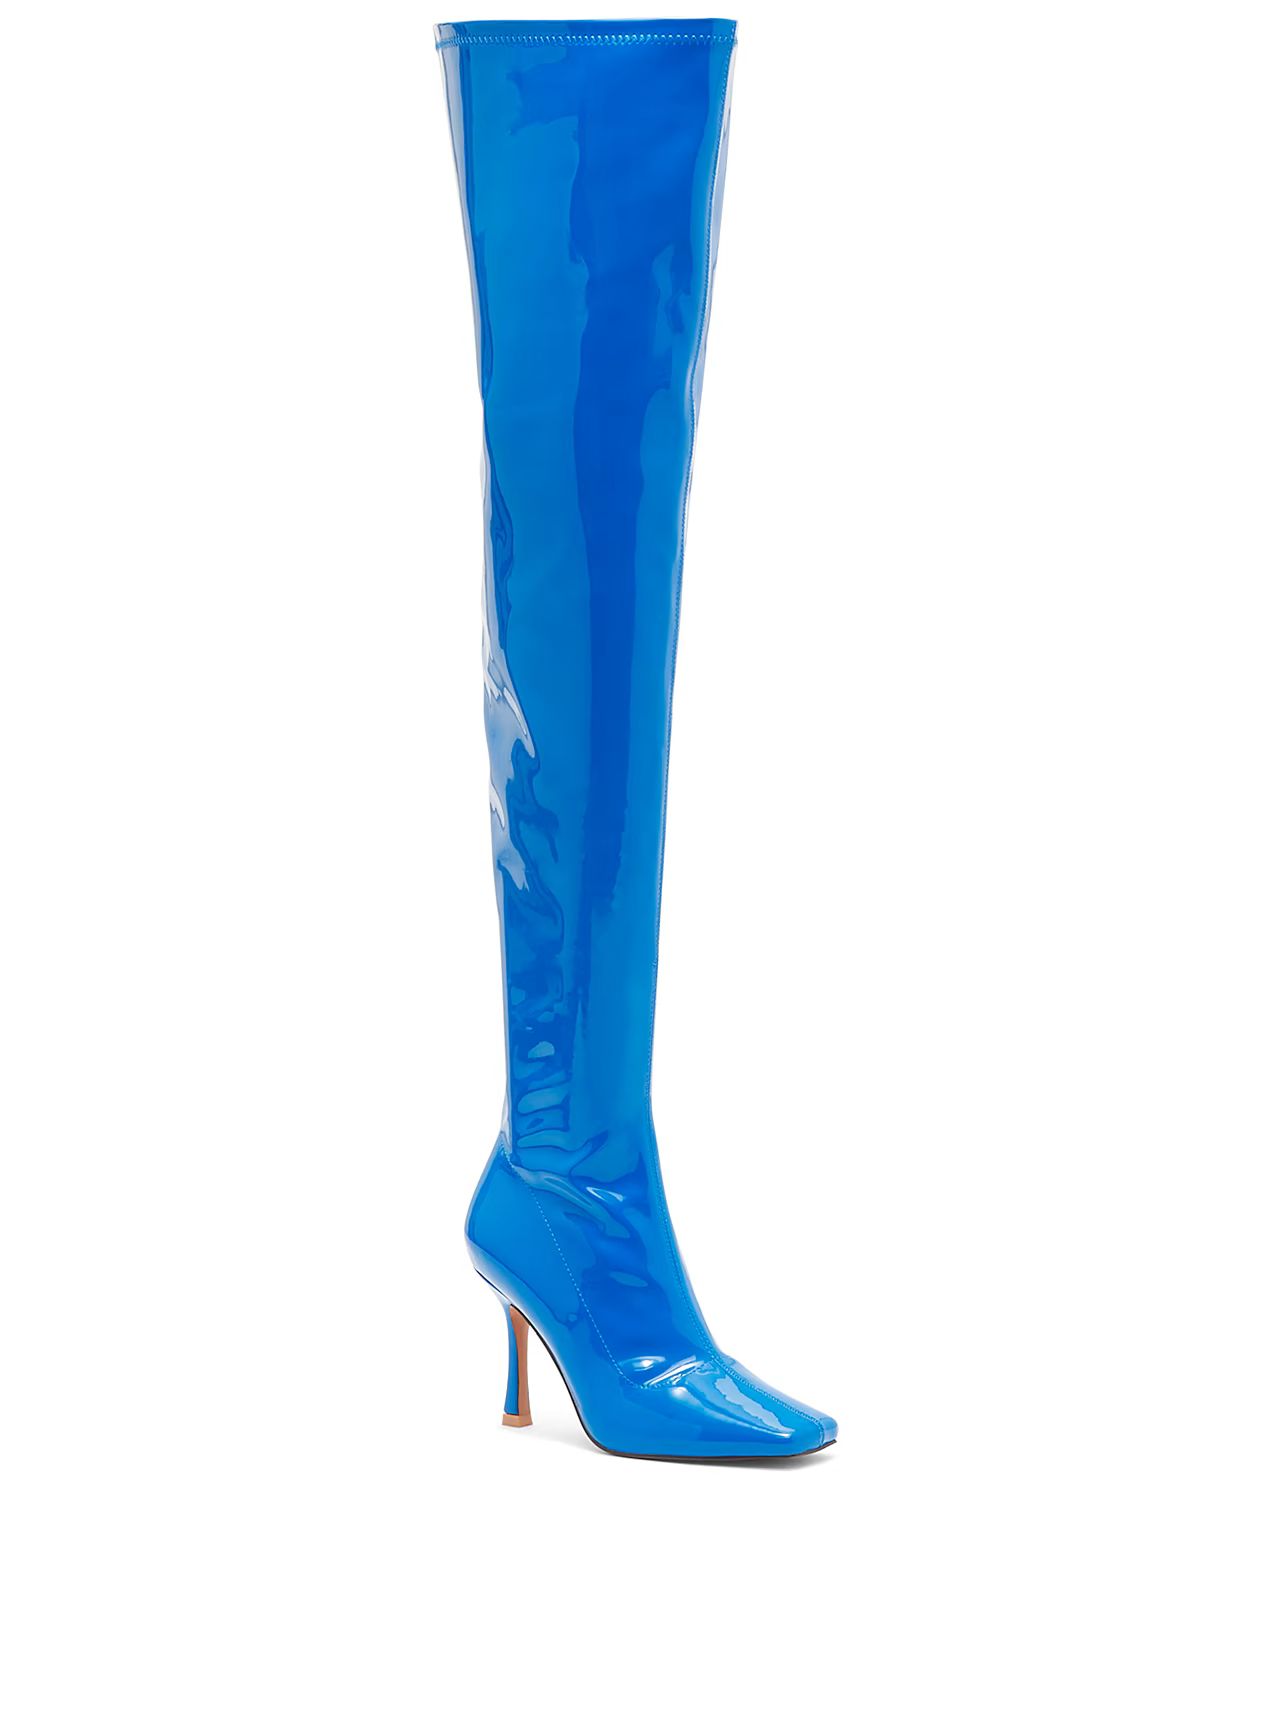 Natalia Thigh High Boot - Faux Patent Leather - New York & Company | New York & Company